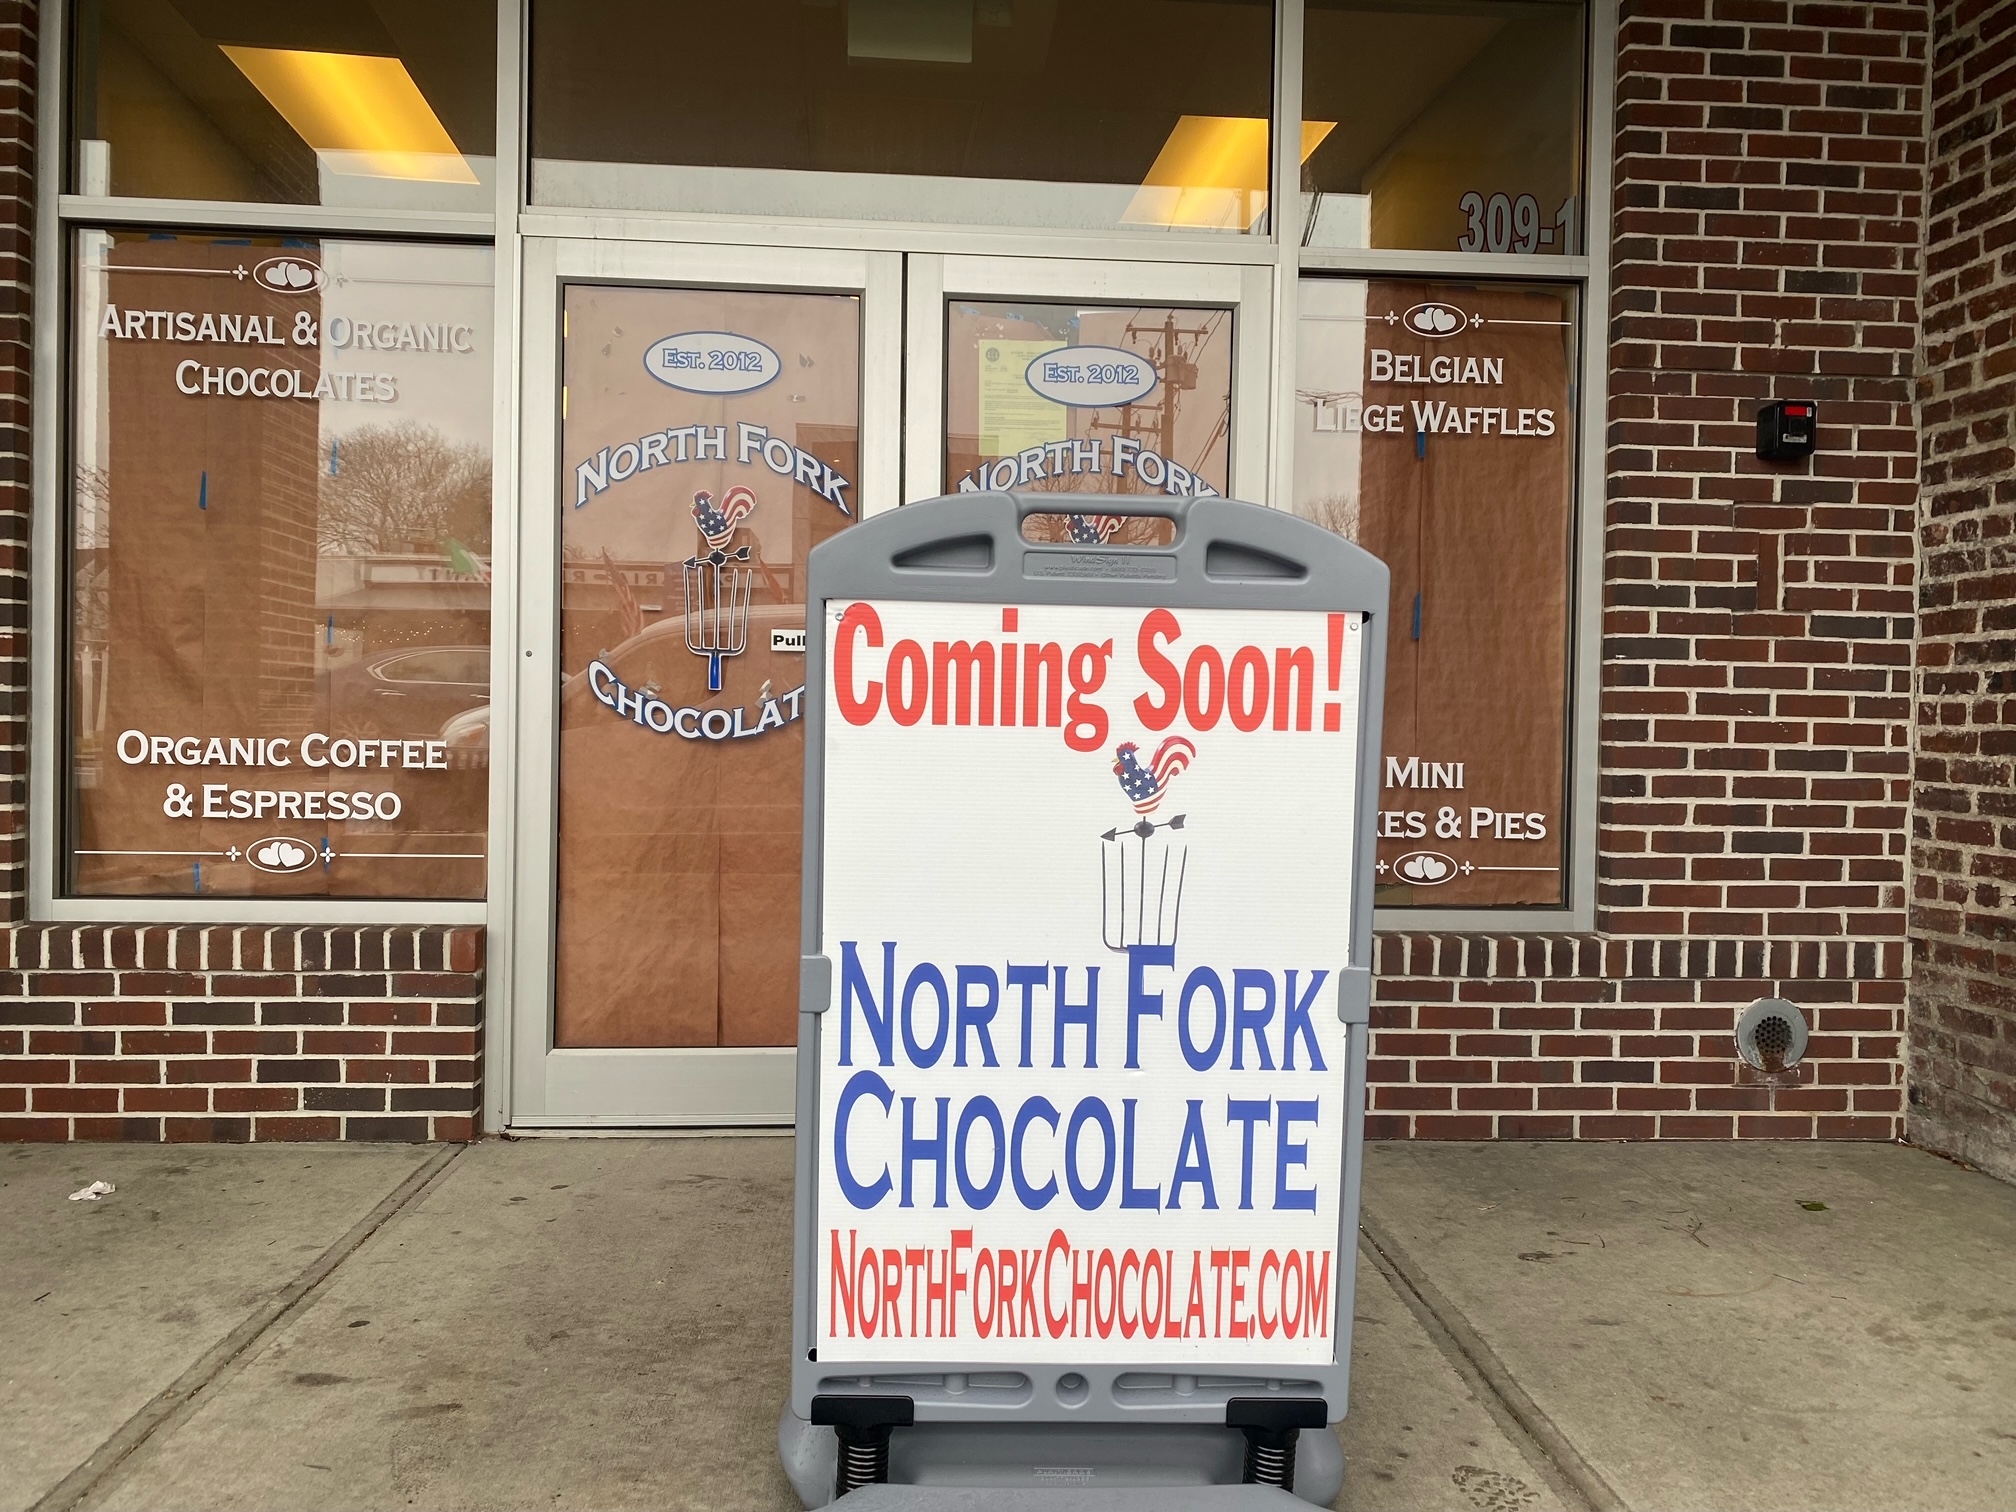 The new Riverhead location of the North Fork Chocolate Company is coming soon (NFCC)